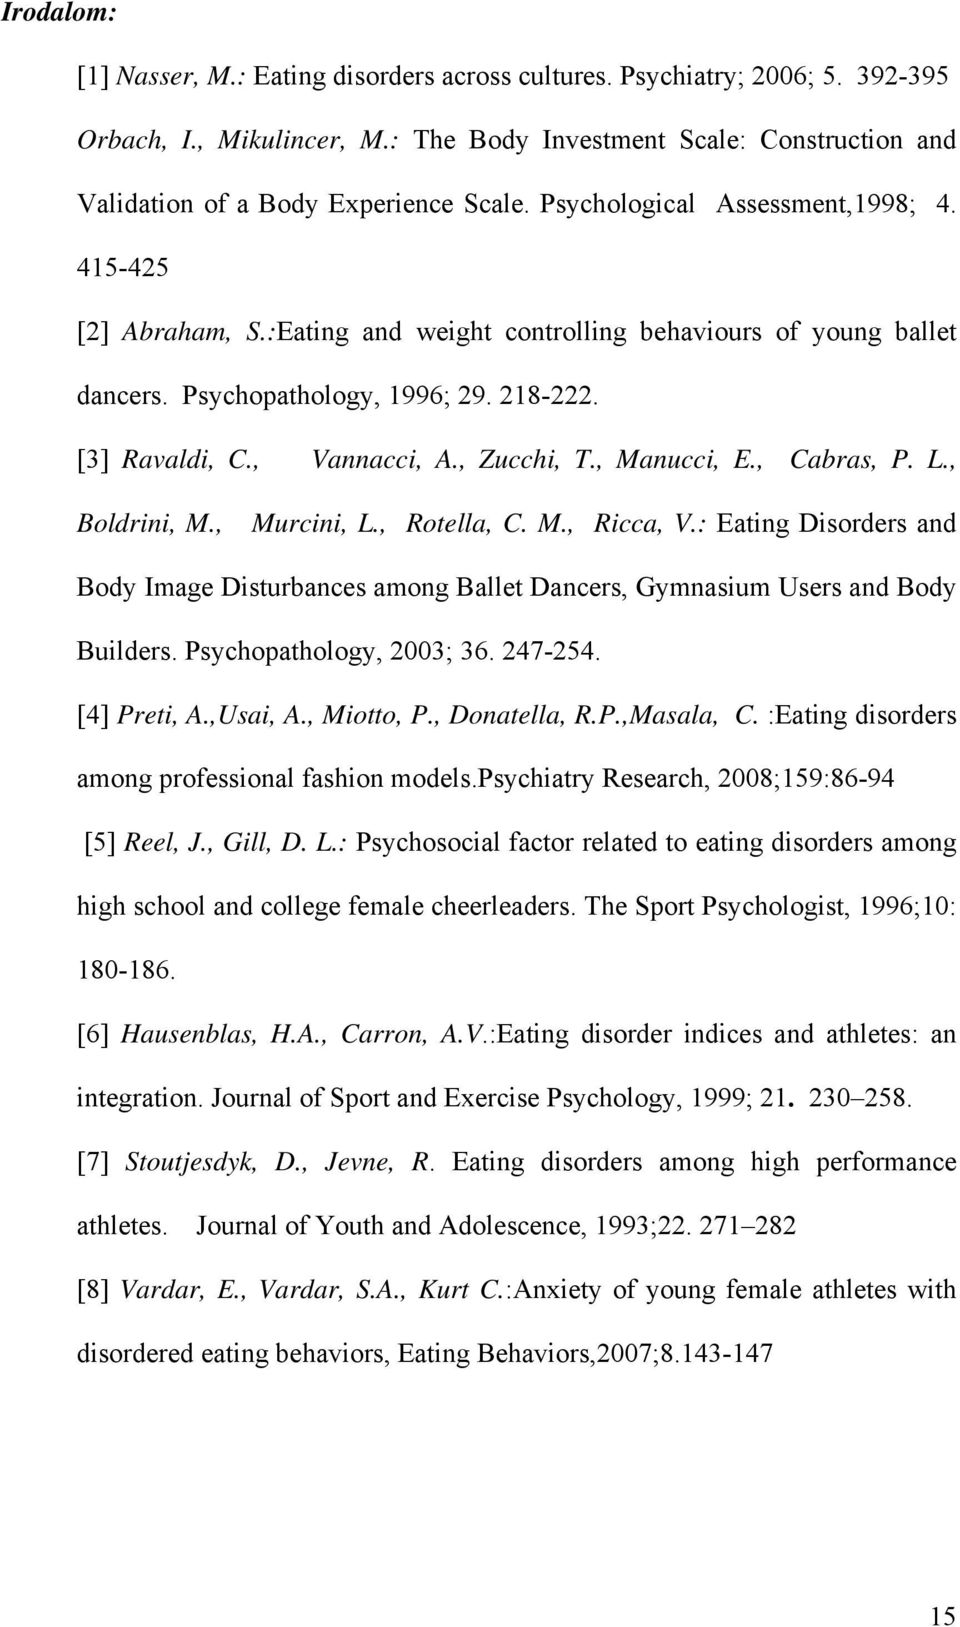 , Zucchi, T., Manucci, E., Cabras, P. L., Boldrini, M., Murcini, L., Rotella, C. M., Ricca, V.: Eating Disorders and Body Image Disturbances among Ballet Dancers, Gymnasium Users and Body Builders.